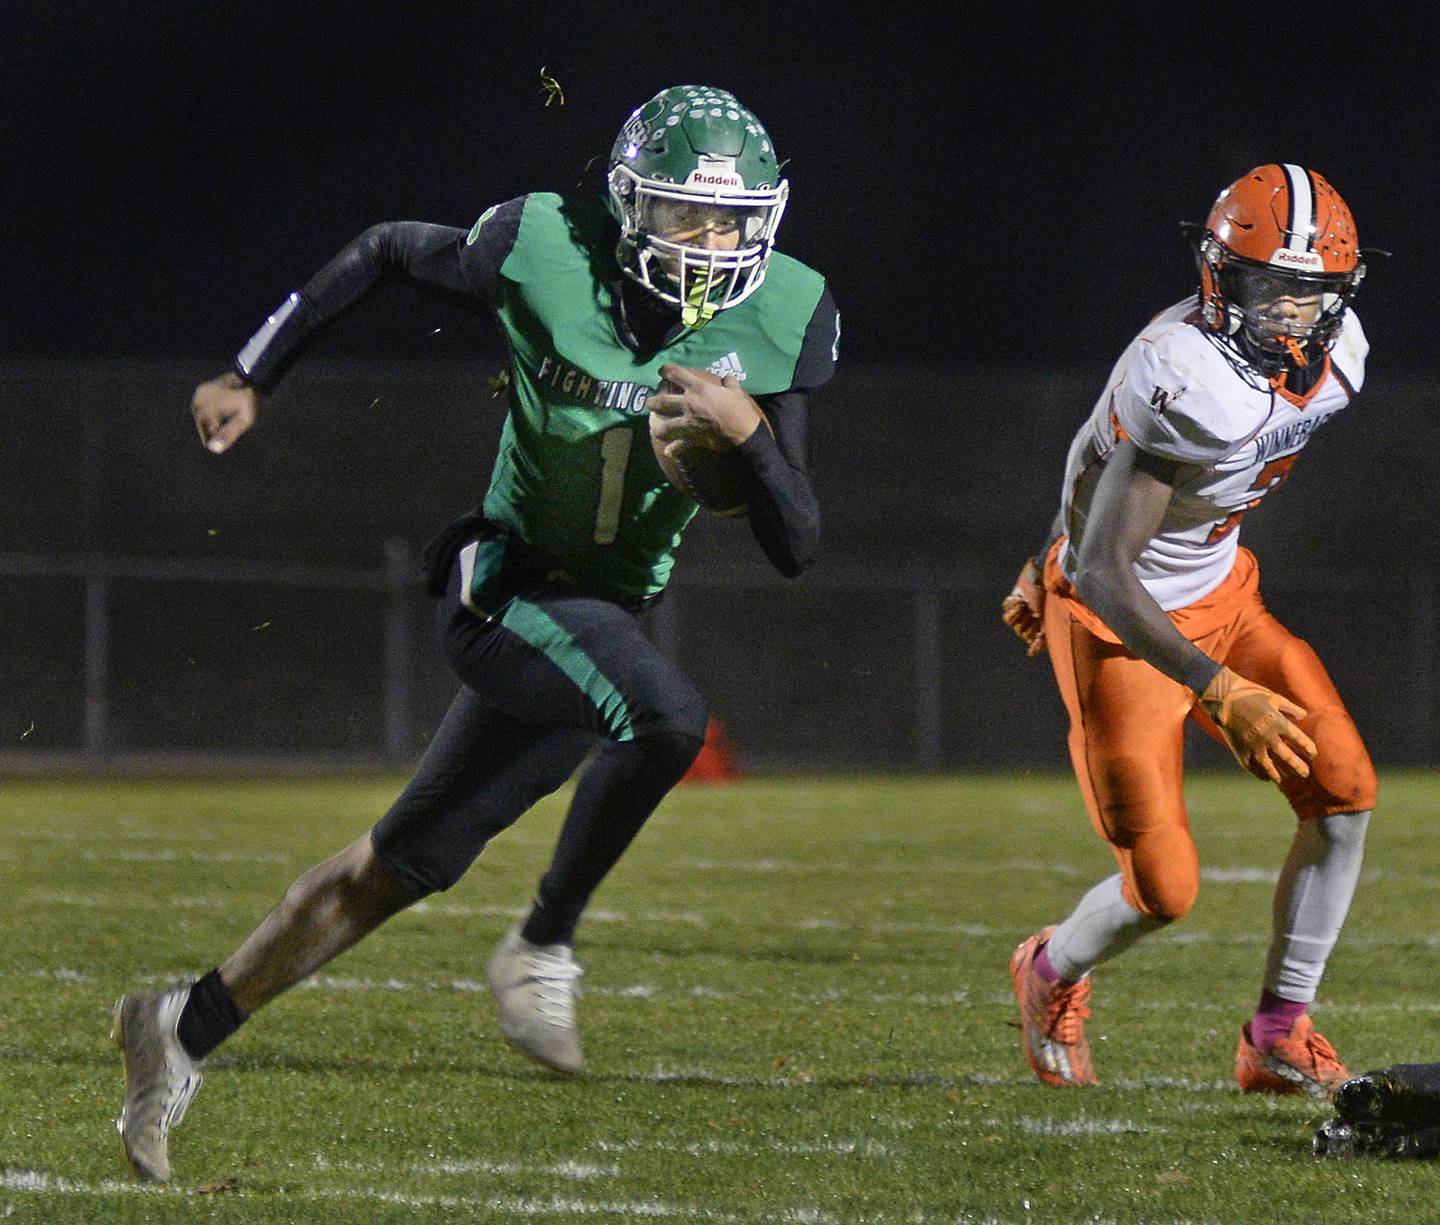 Seneca quarterback Nathan Grant (1) outruns Winnebago’s Eden Trotter on a keeper in the first quarter during the Class 3A playoff game at Seneca on Friday, Oct. 28, 2022.